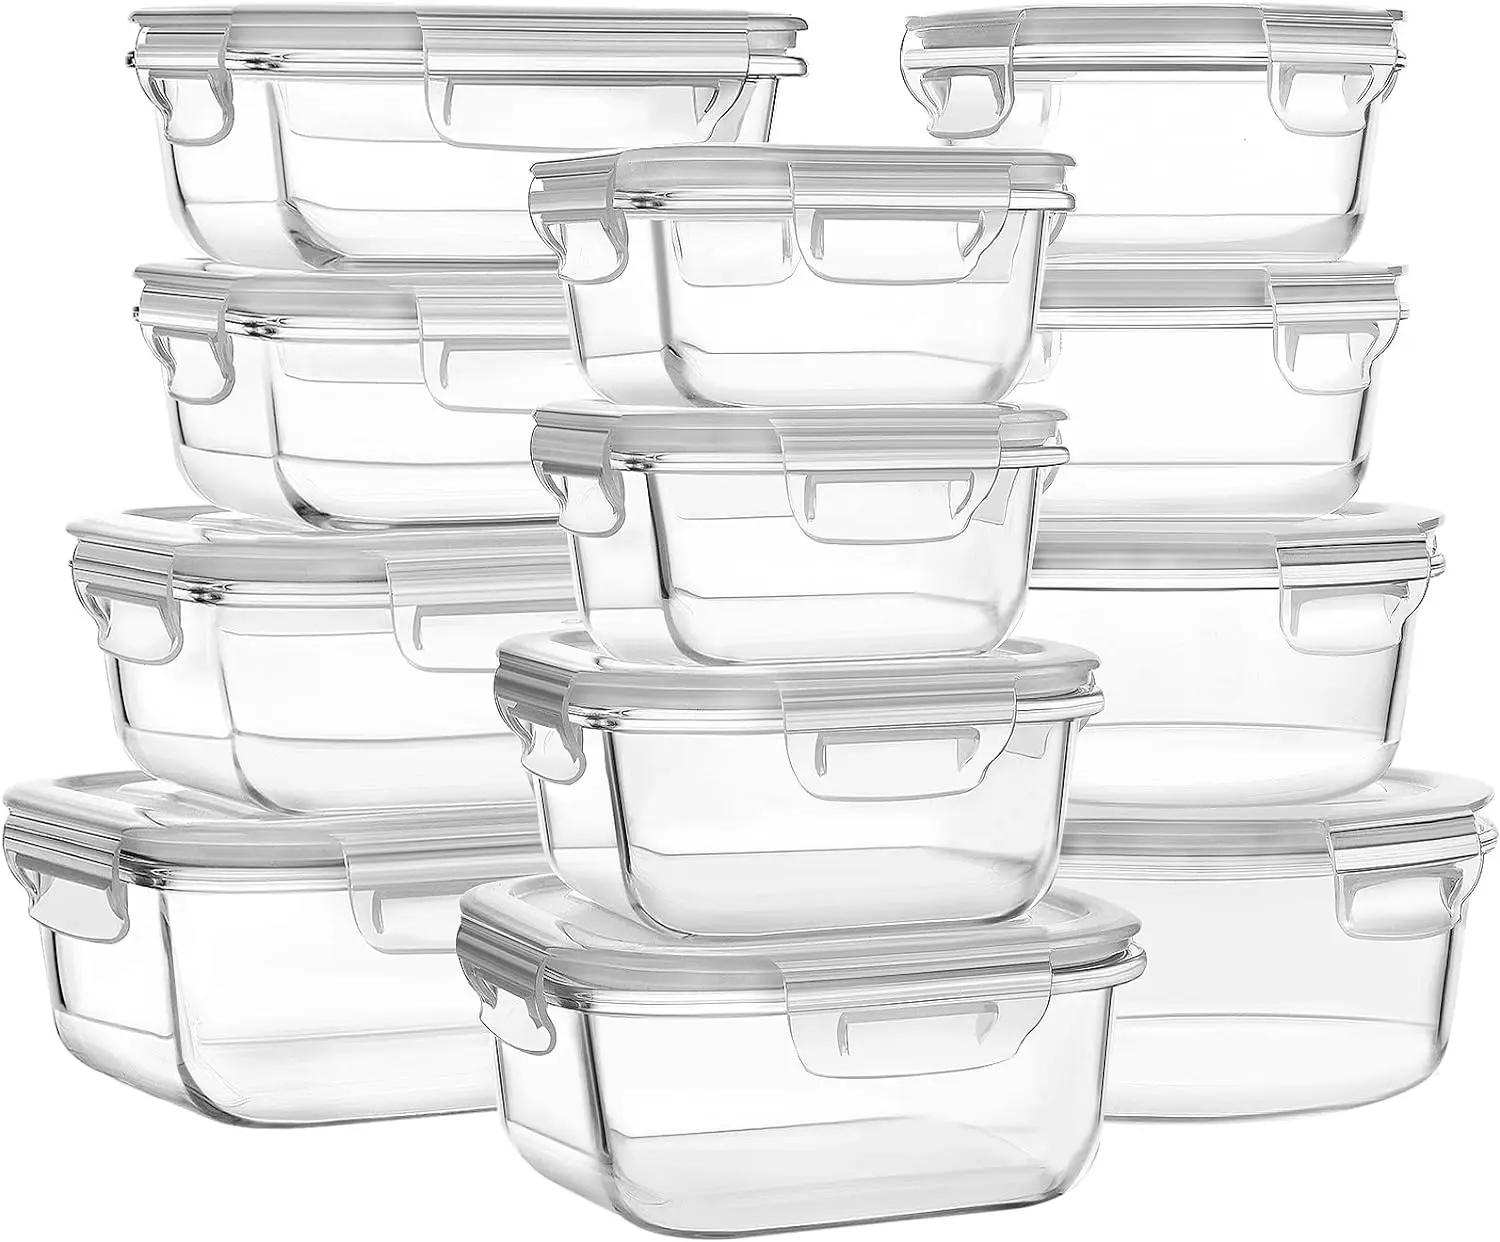 

12 Sets Glass Food Storage Containers with Lids, Meal Prep Containers, Airtight Bento Boxes, BPA Free & Leak Proof